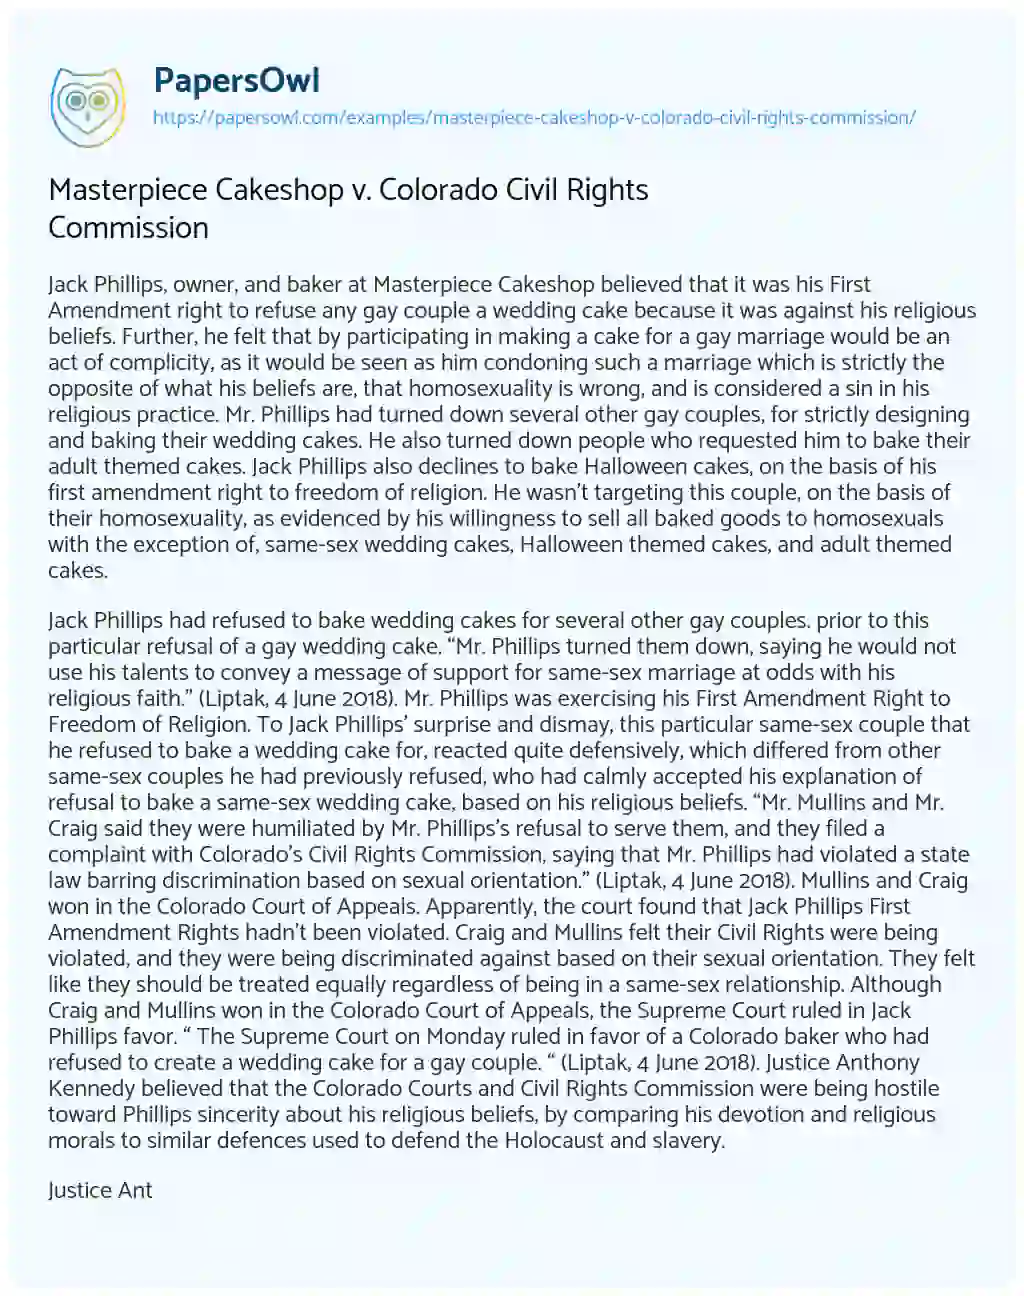 Essay on Masterpiece Cakeshop V. Colorado Civil Rights Commission